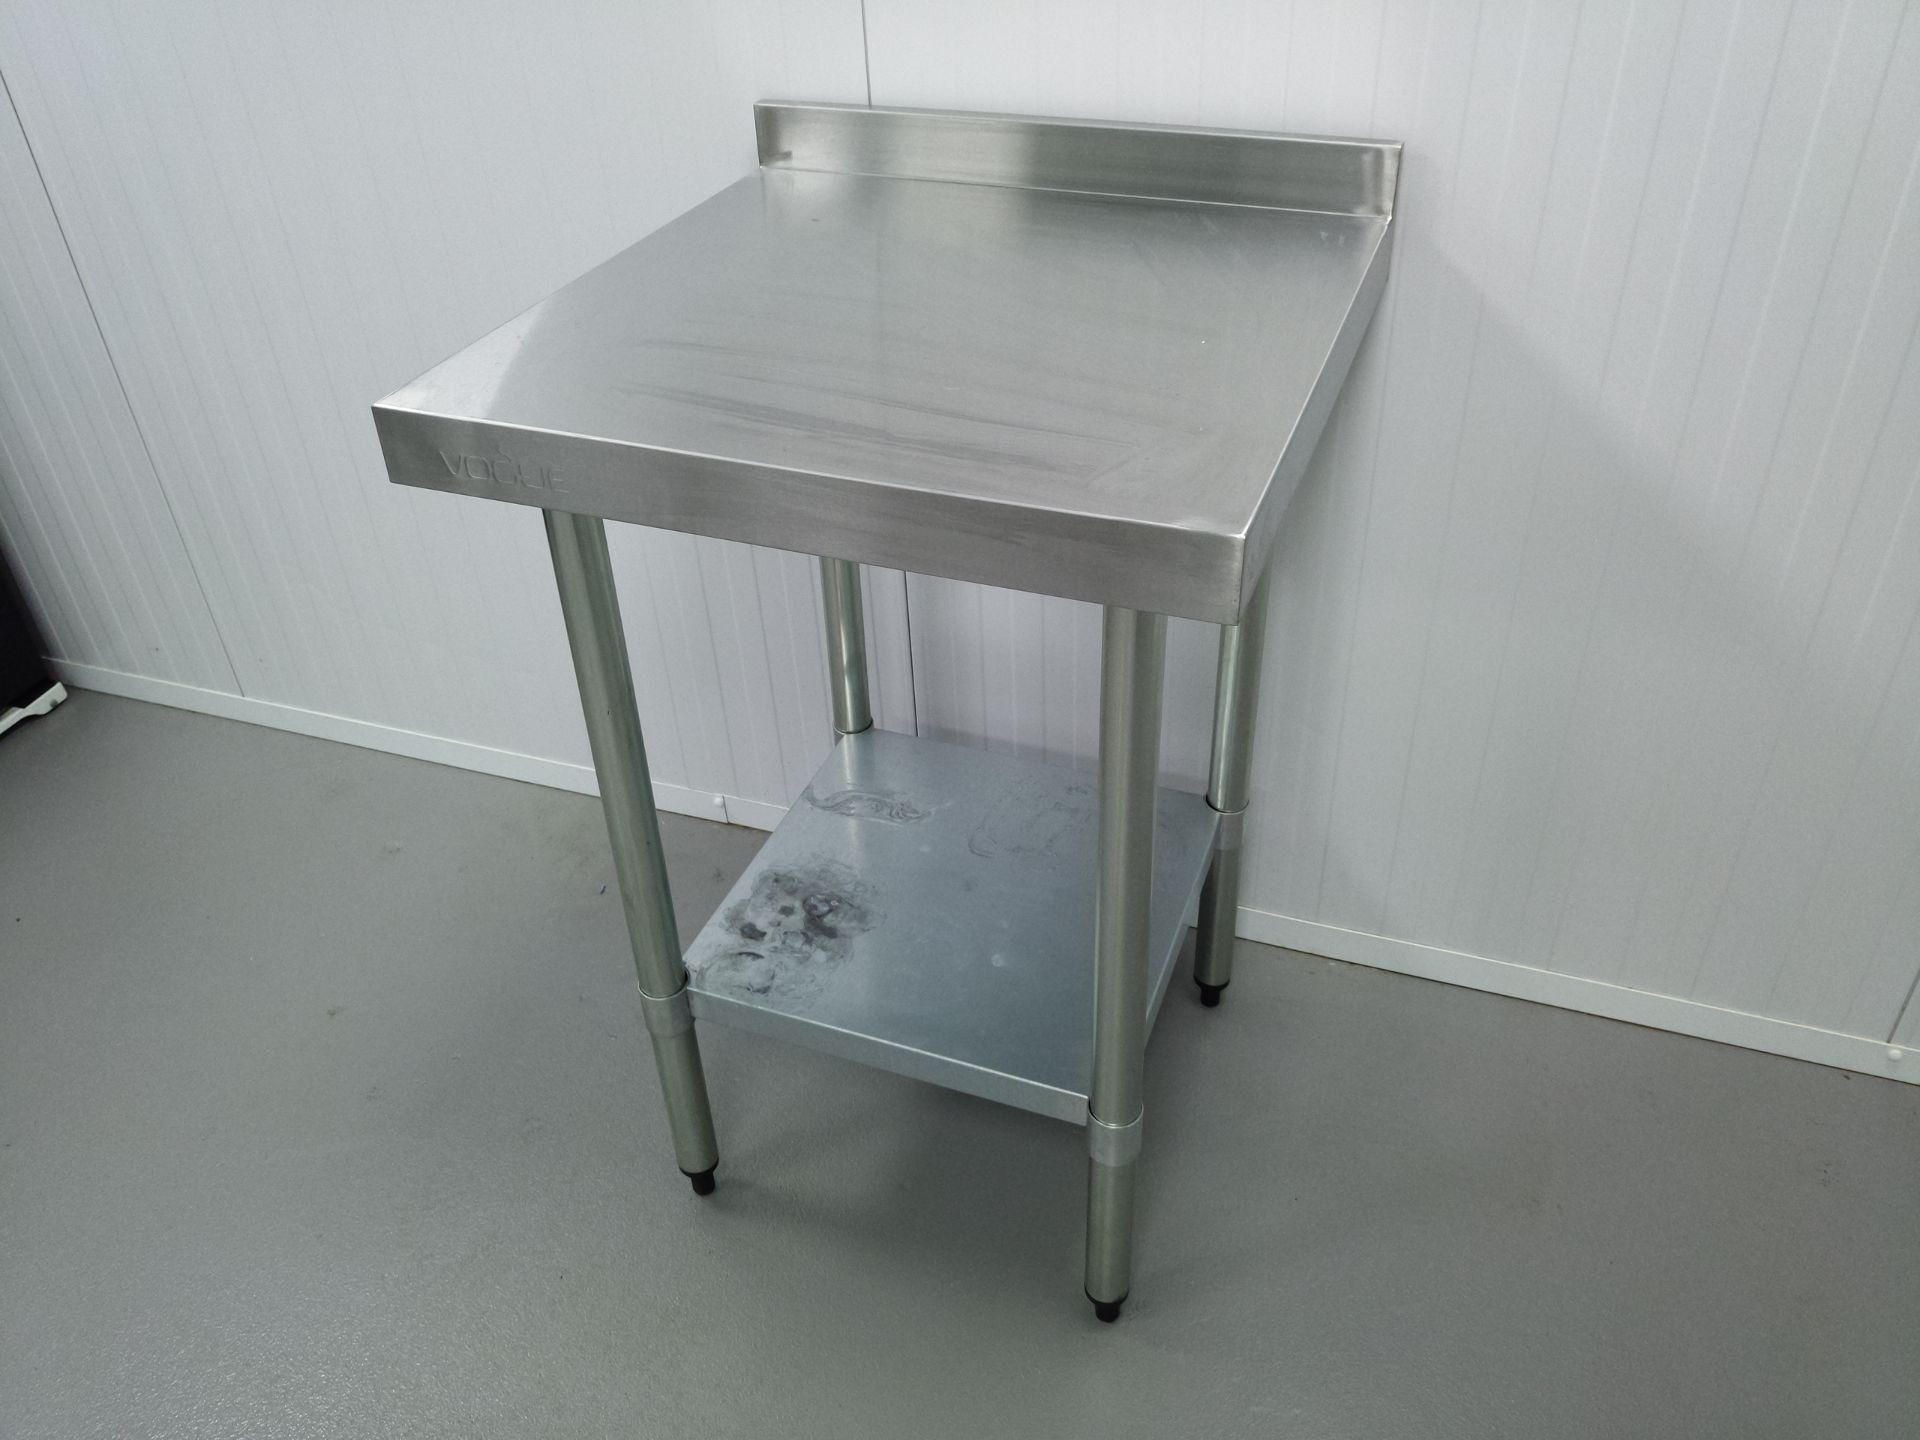 Vogue Stainless Steel Table with Upstand 600mm - Image 2 of 2